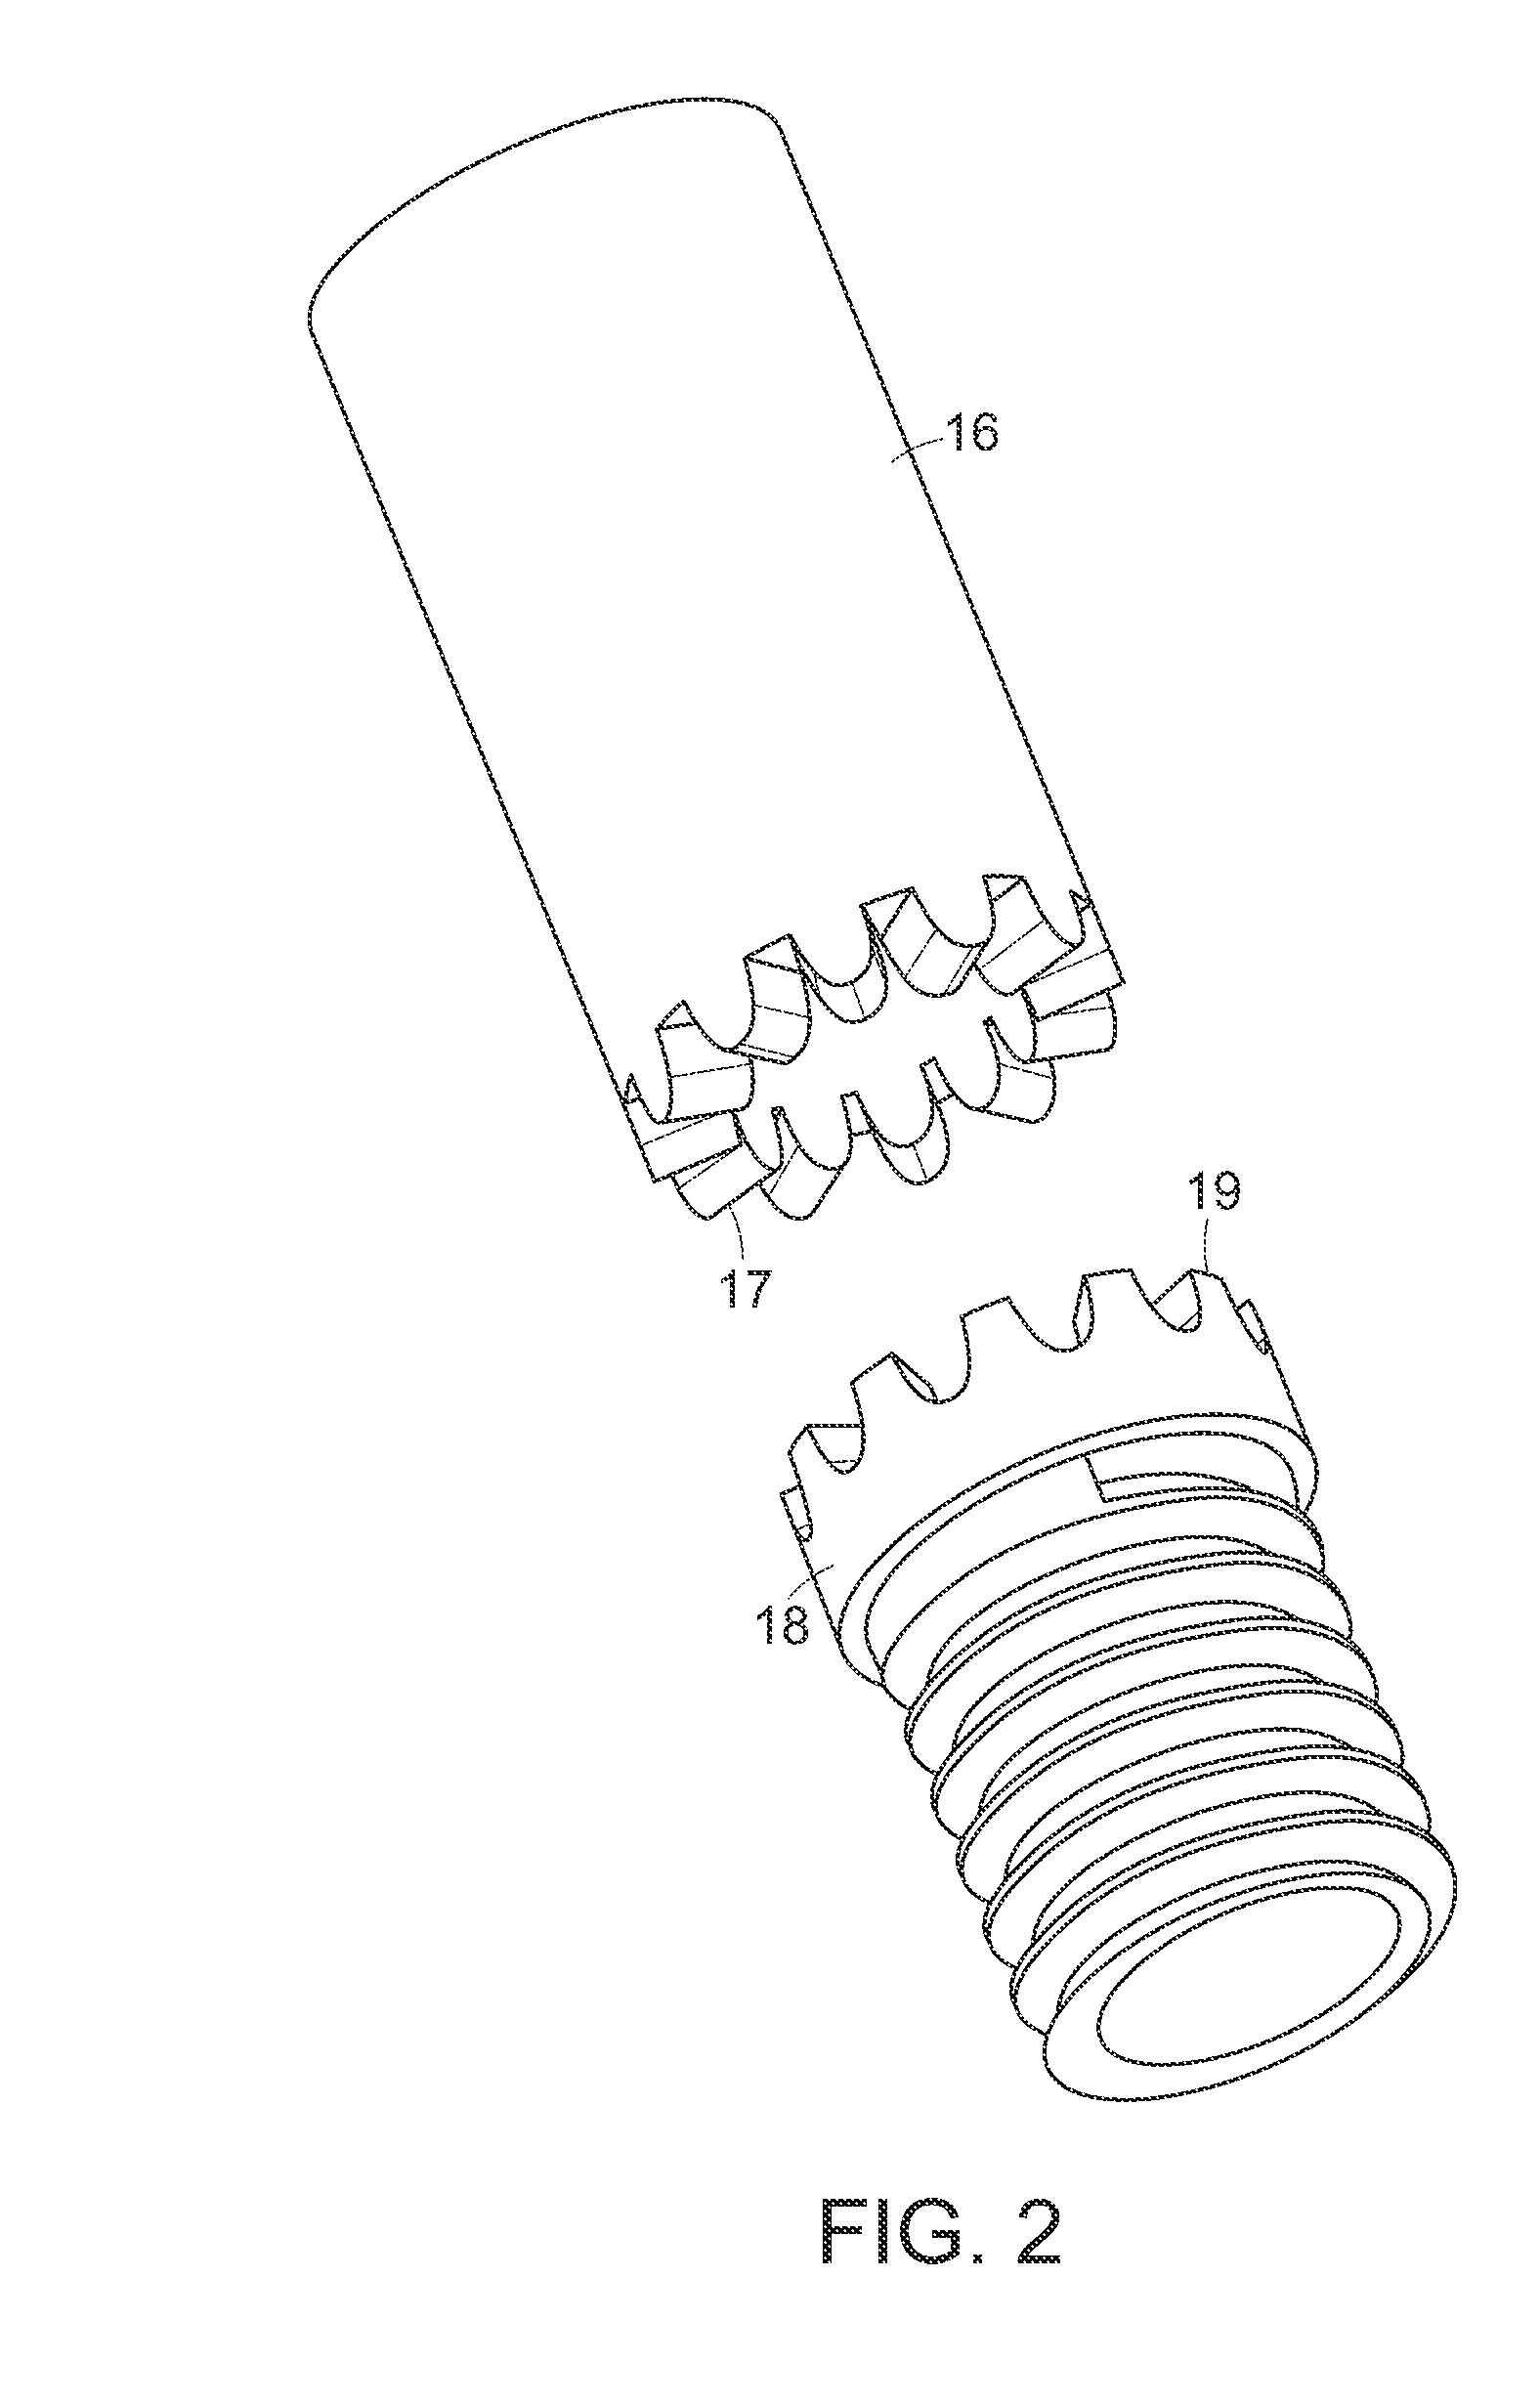 Interchangeable shaft and club head connection system